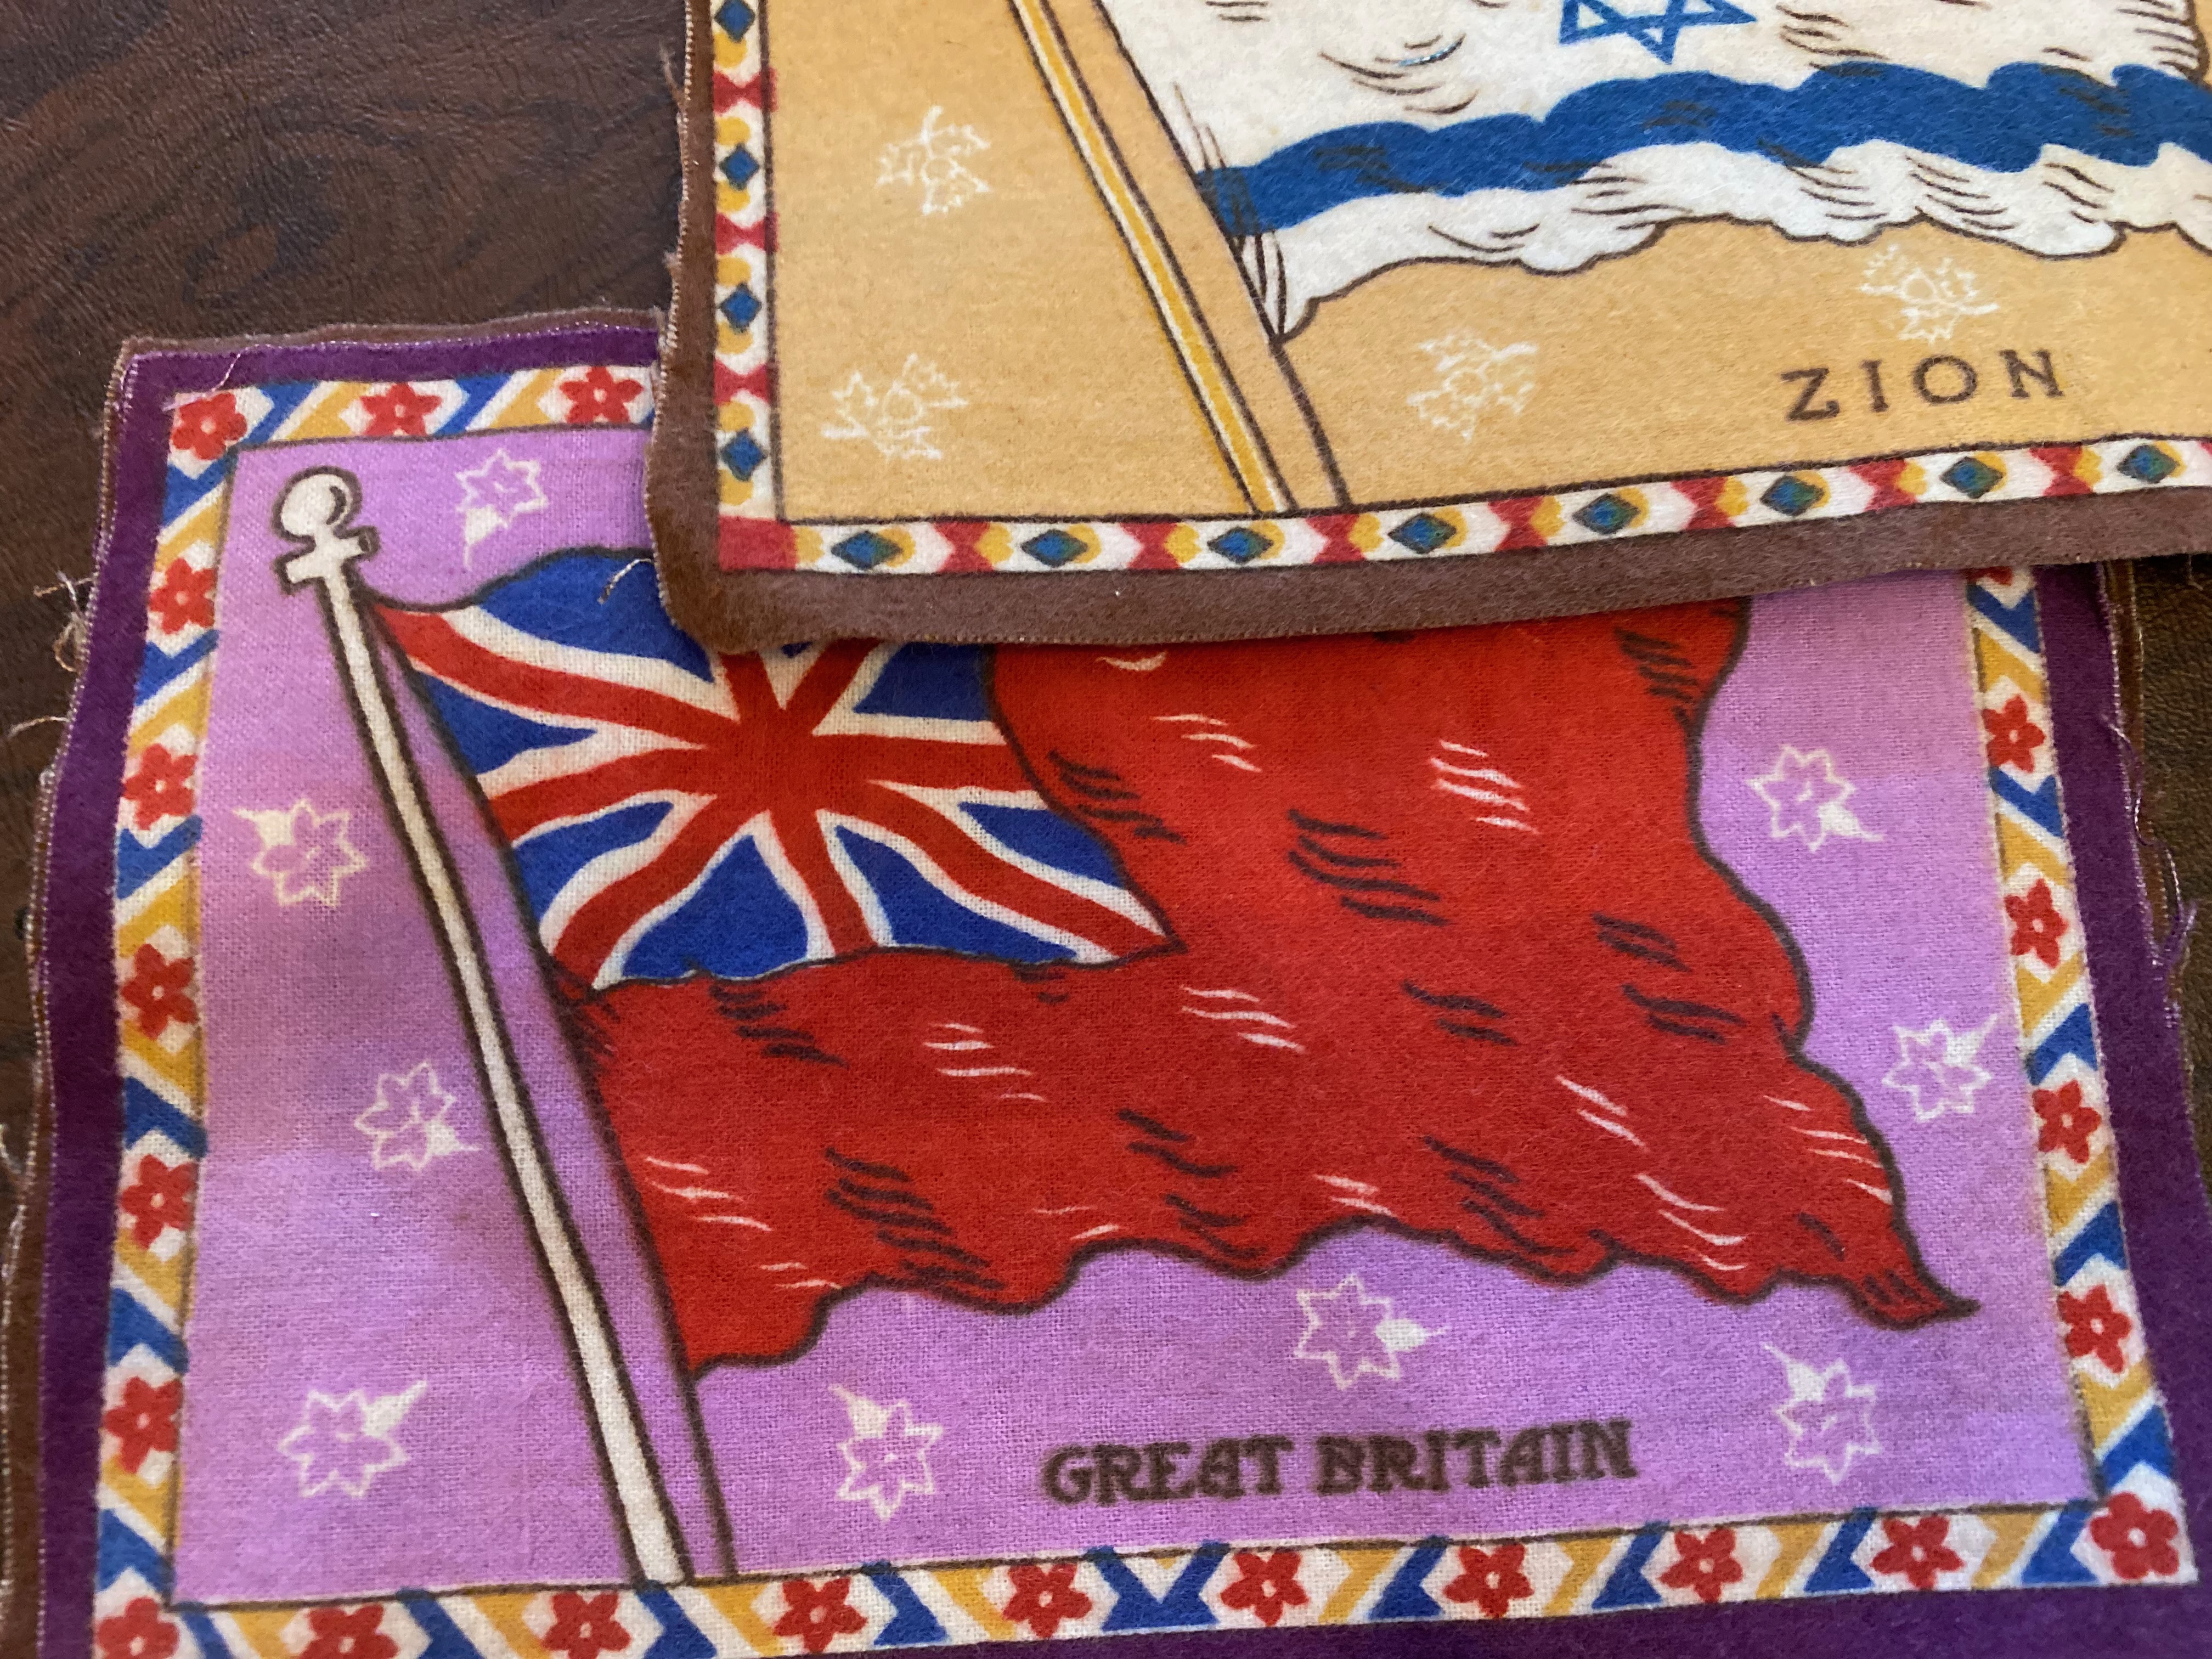 Tobacco Silks - Great Britain and Zion - Image - Quiltblox.com